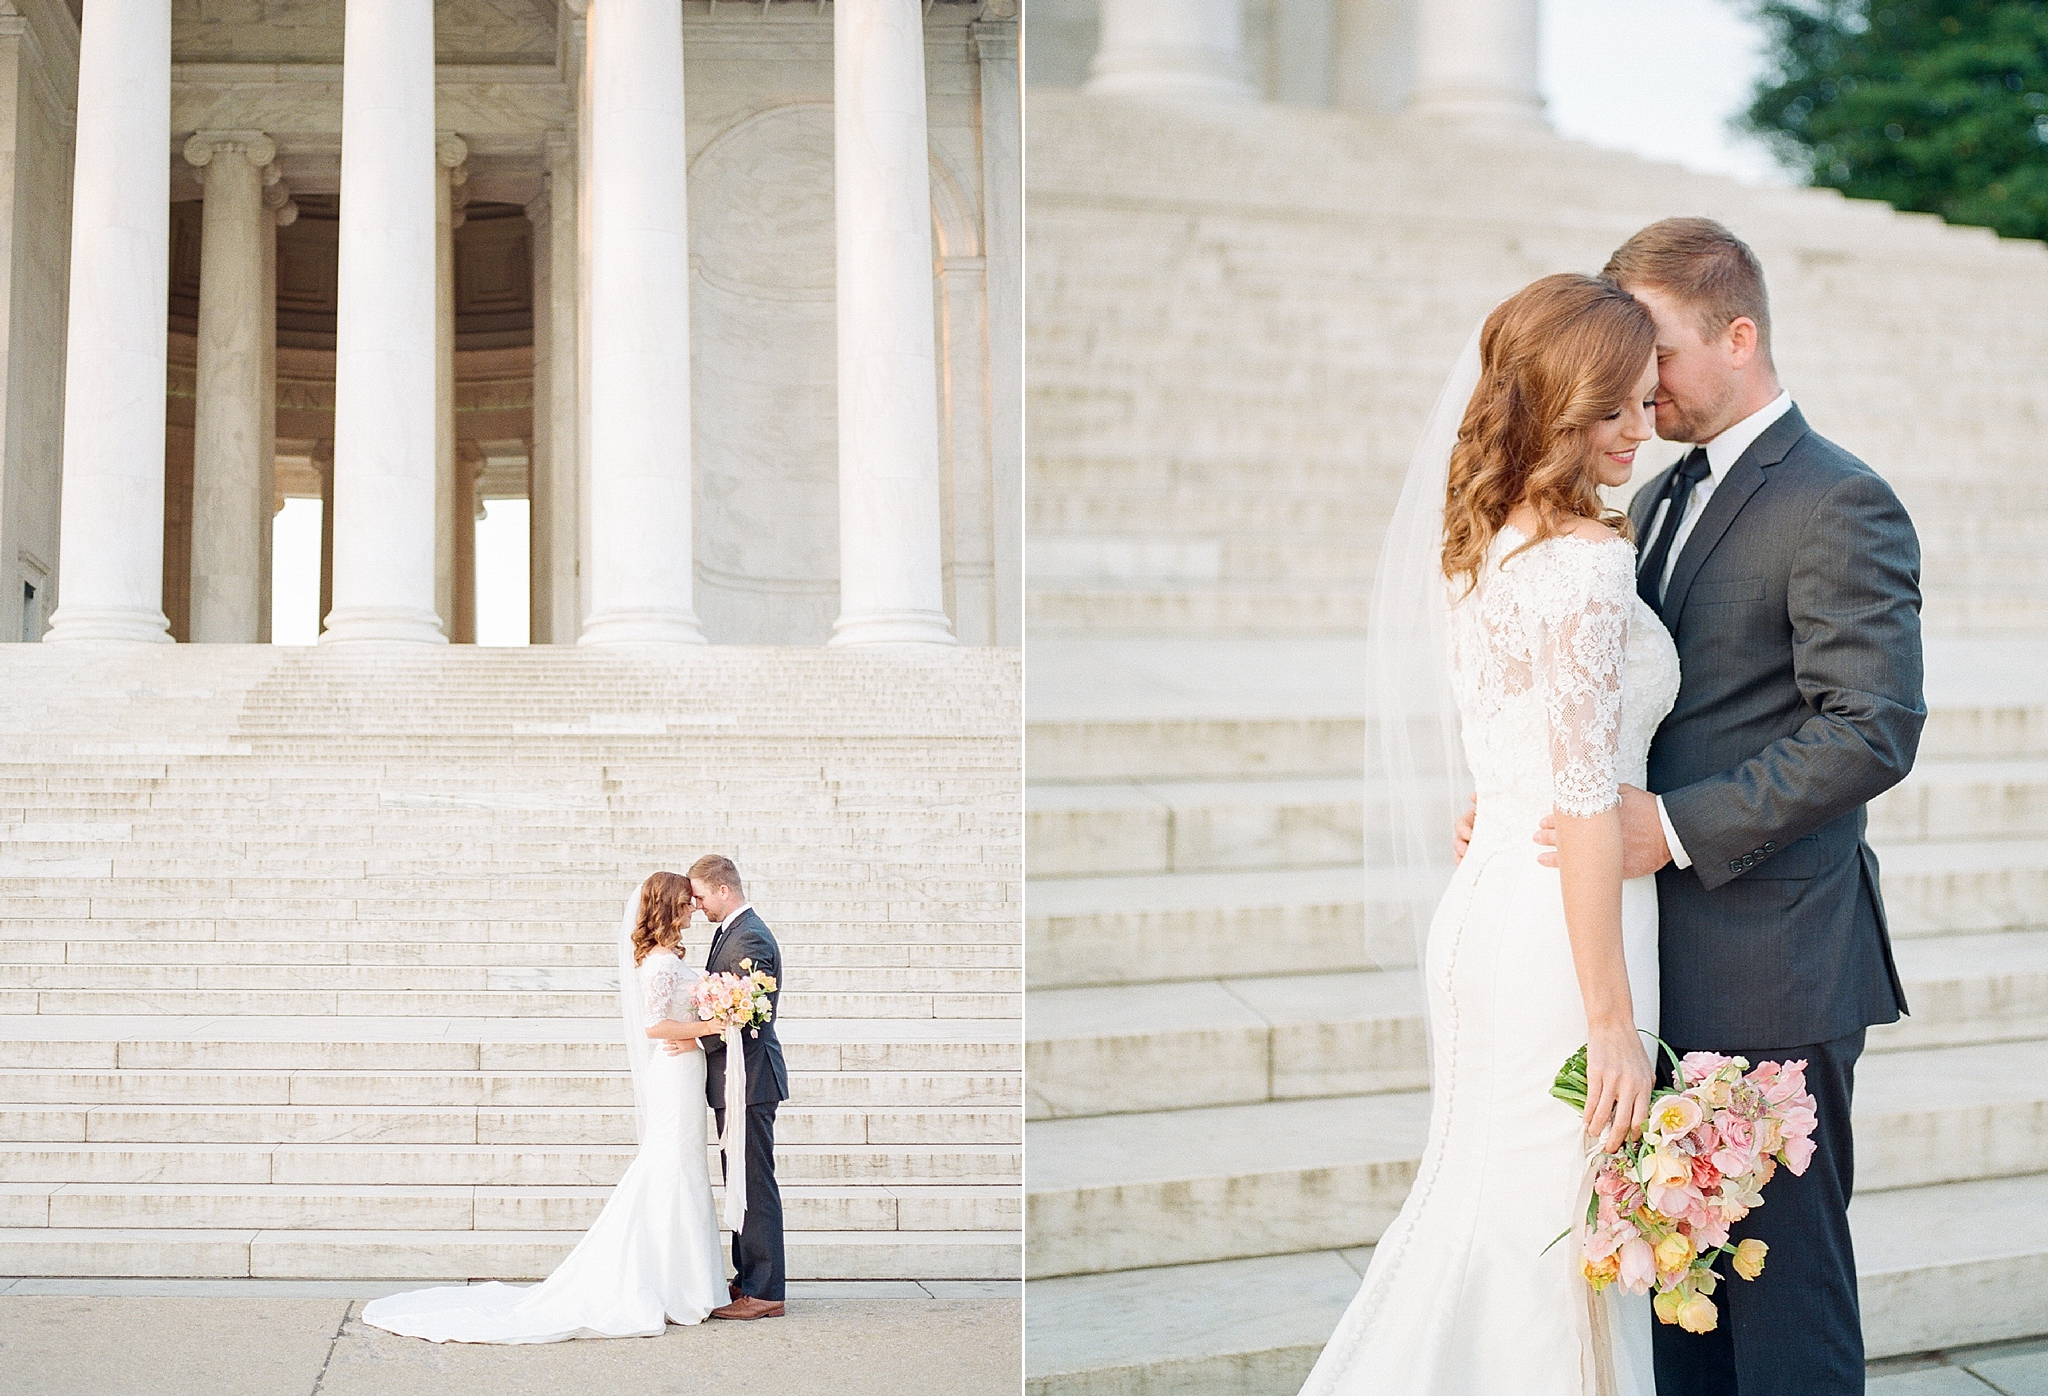 These stunning photos were taken during a spring wedding at the Jefferson Memorial in Washington, DC during peak bloom of the infamous cherry blossoms.